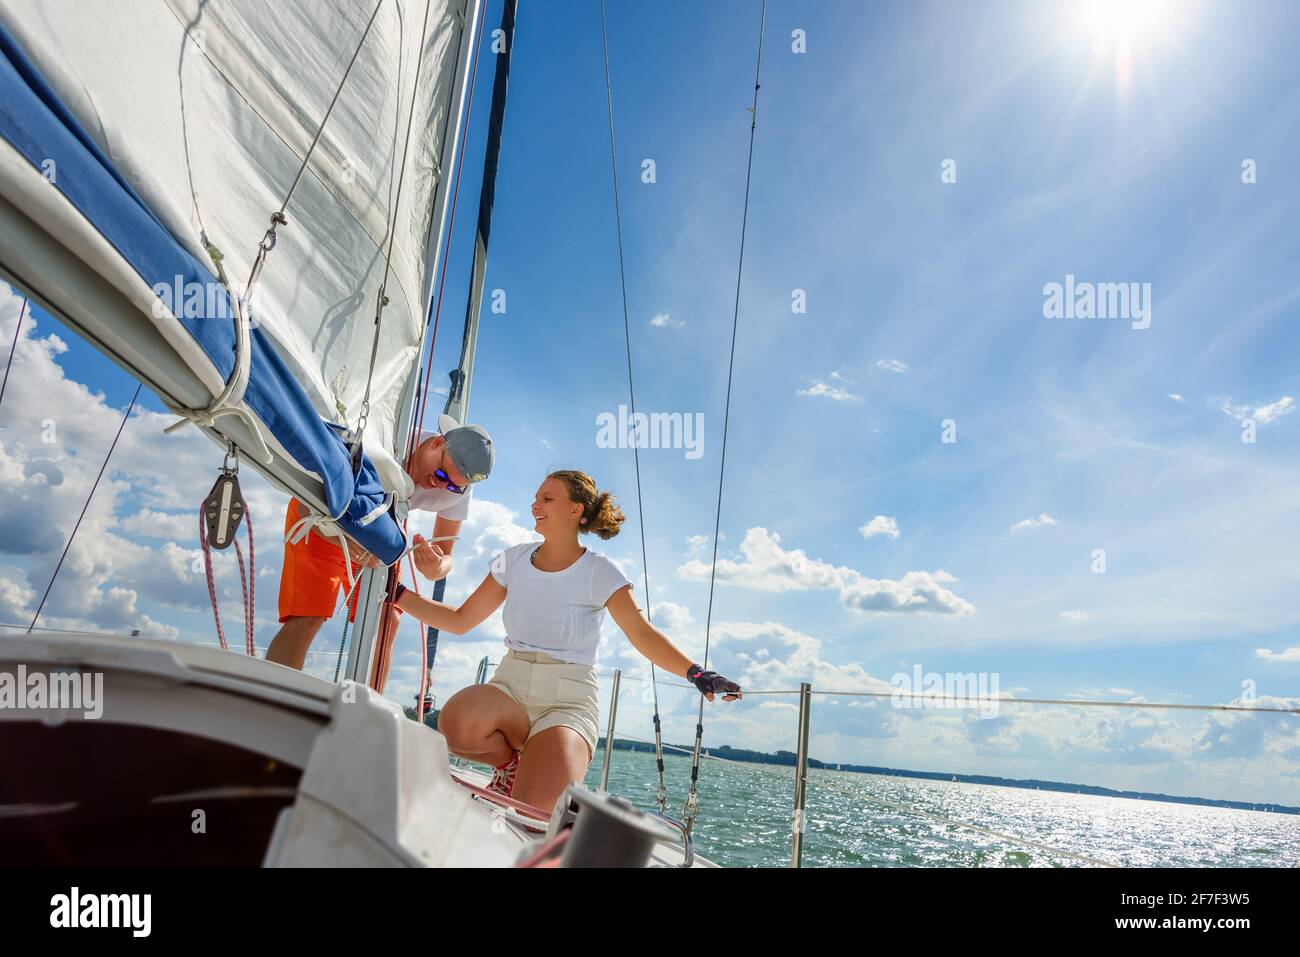 Young man and woman sailing on a yacht. Female sailboat crewmember trimming main sail during sail on vacation in summer season Stock Photo